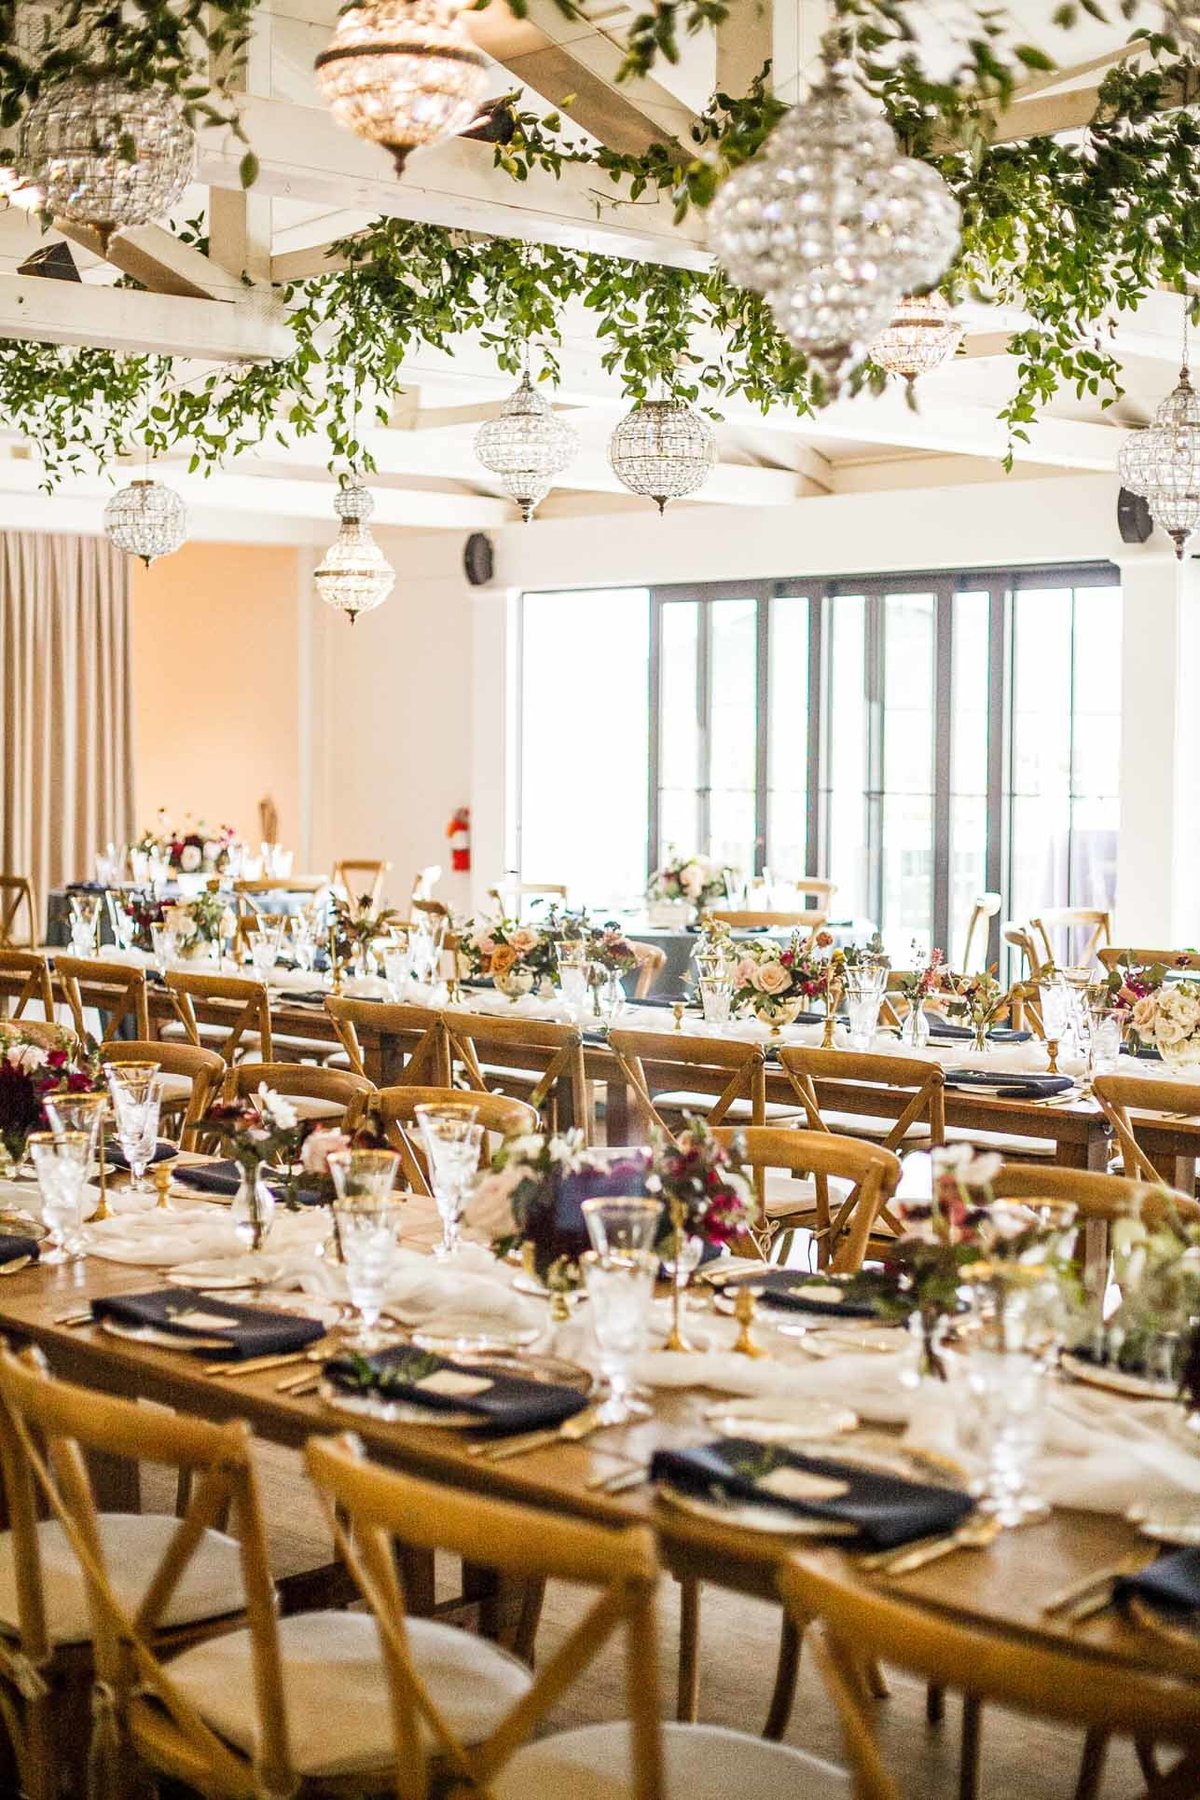 long wooden banquet tables, Vineyard chairs, navy blue napkin, crystal chandeliers, and greenery in ceiling